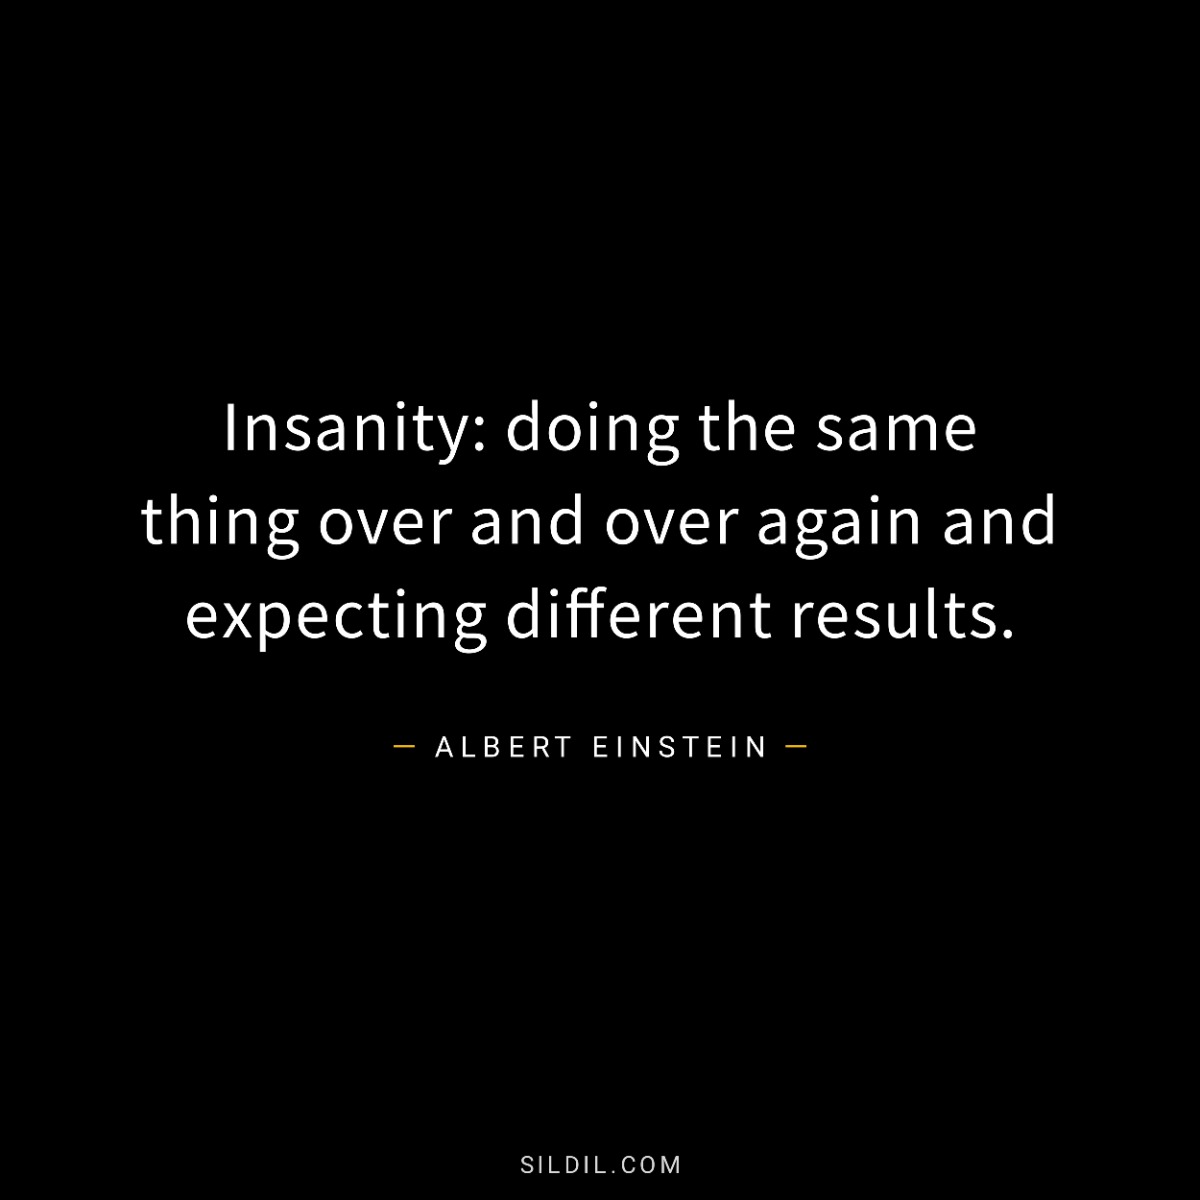 Insanity: doing the same thing over and over again and expecting different results.